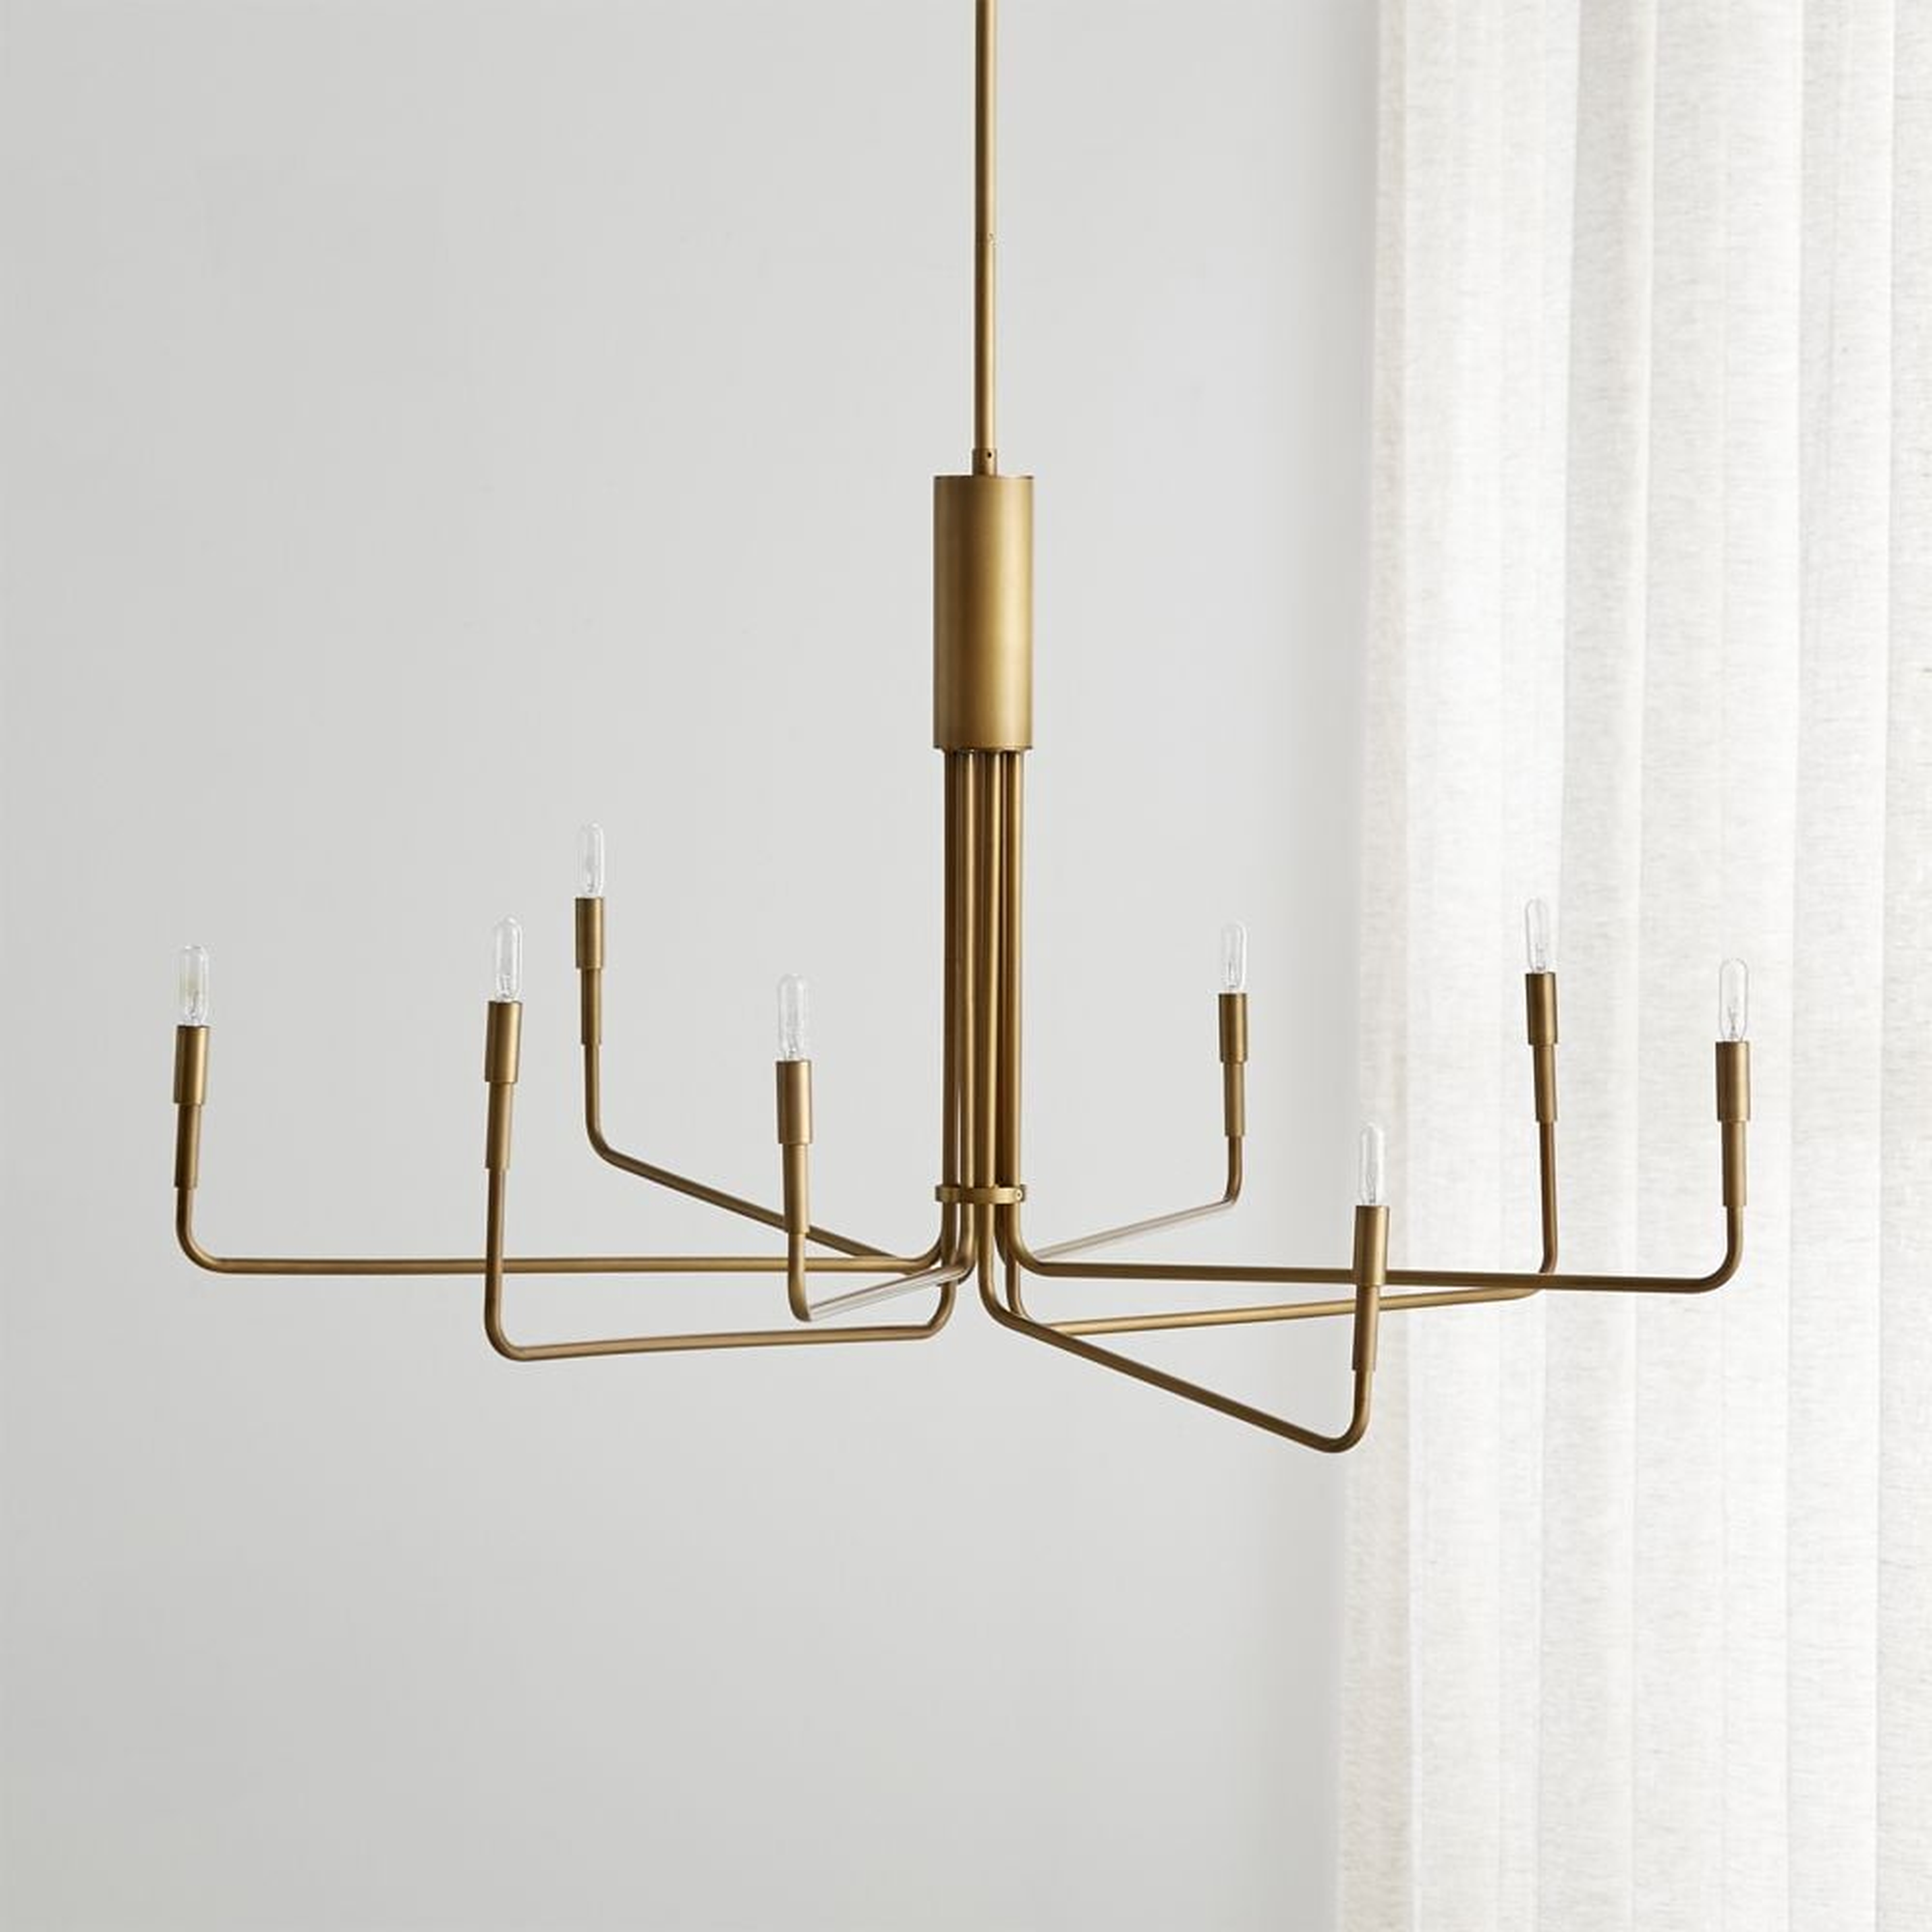 Clive 8-Arm Brass Chandelier Light - Crate and Barrel